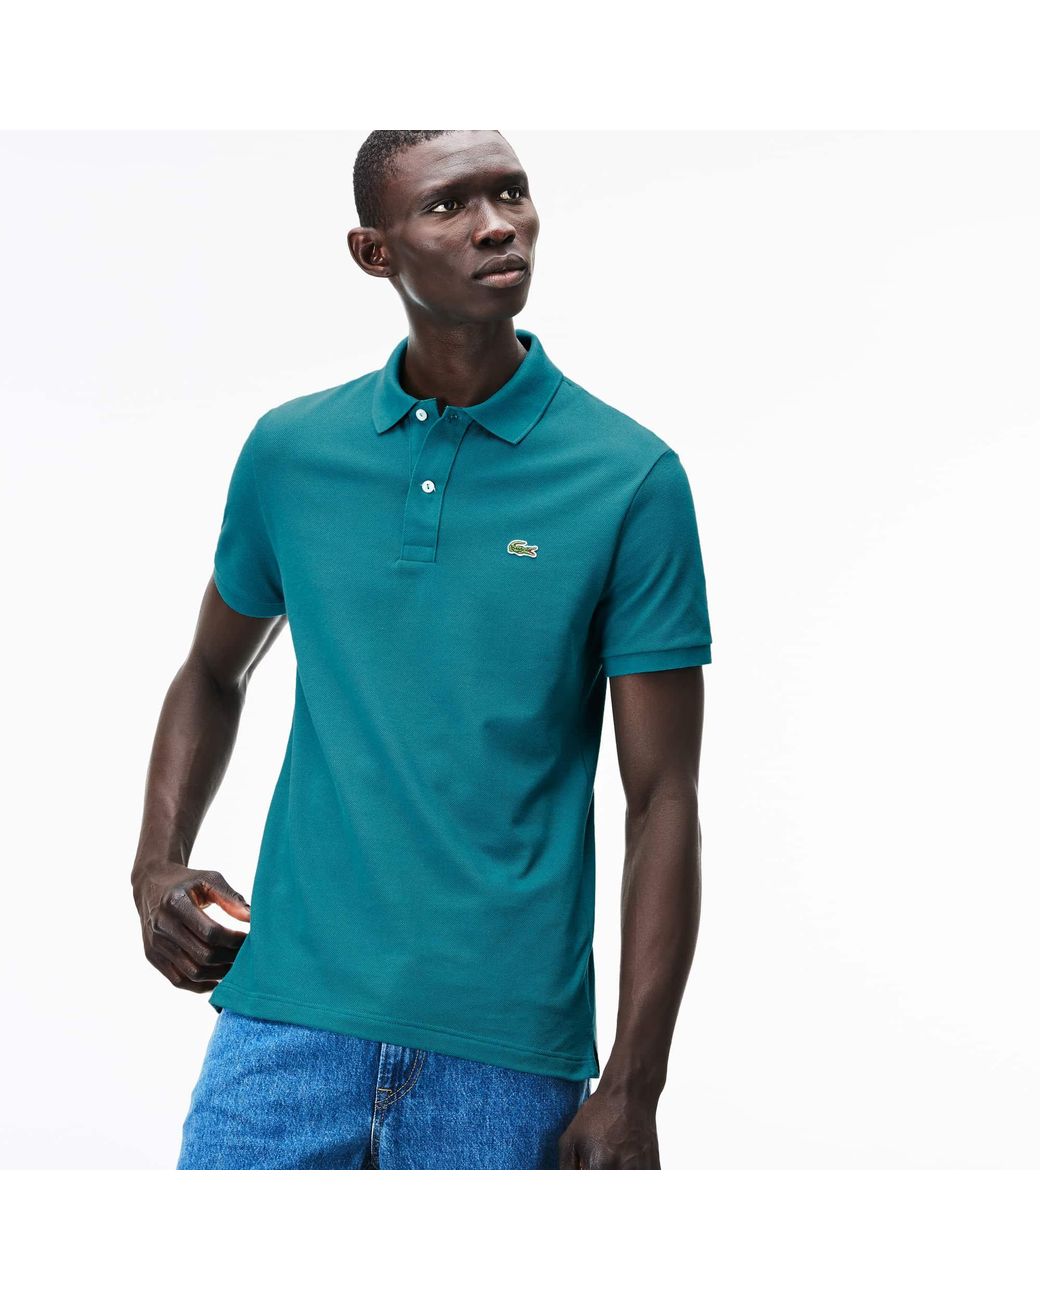 Lacoste Cotton Slim Fit Polo In Petit Piqué in Green for Men - Lyst